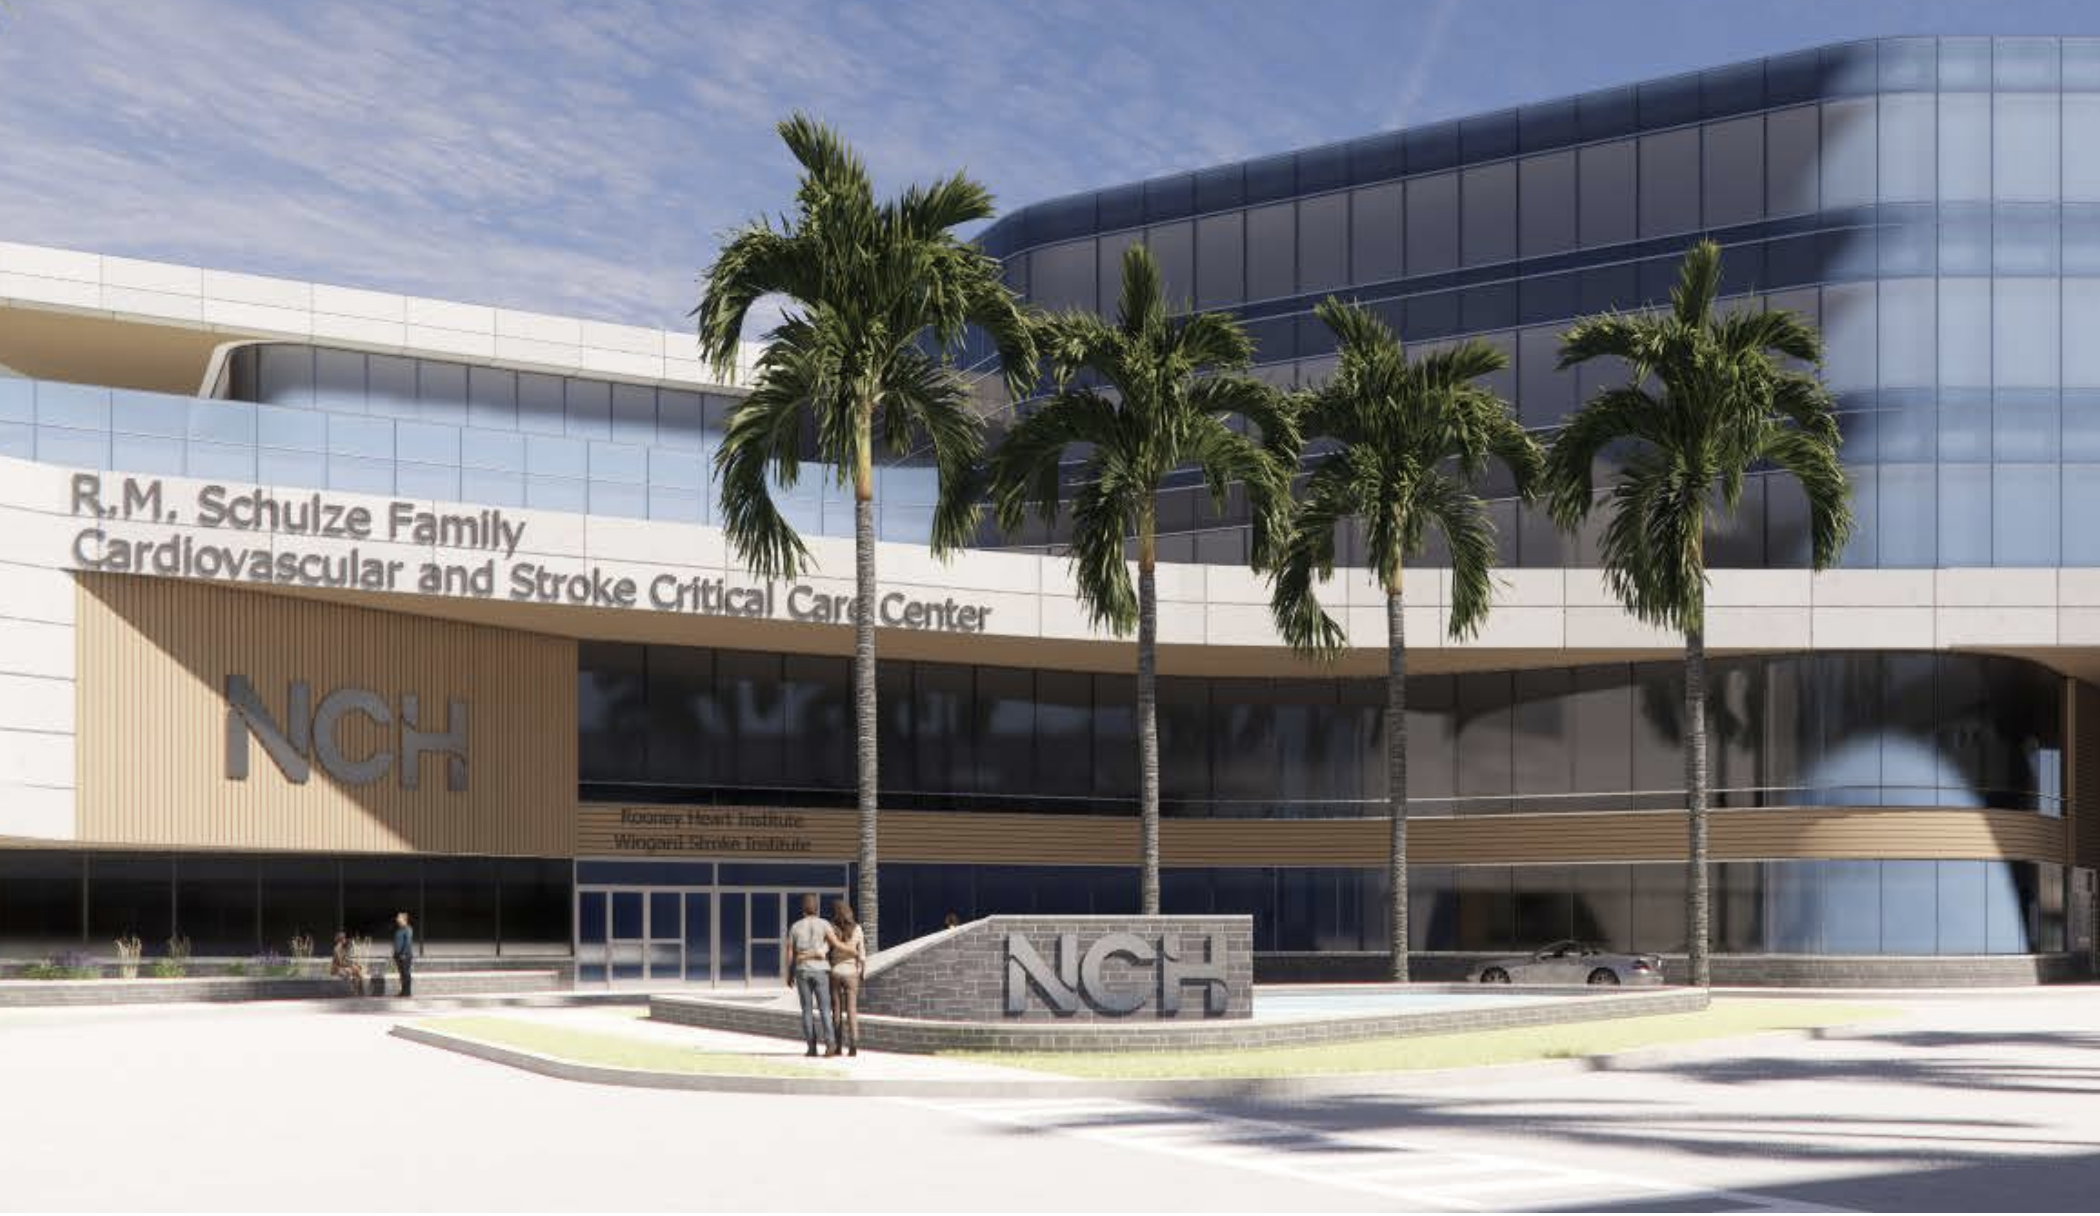 Naples Community Hospital R.M. Schulze Family Cardiovascular and Stroke Critical Care Center rendering